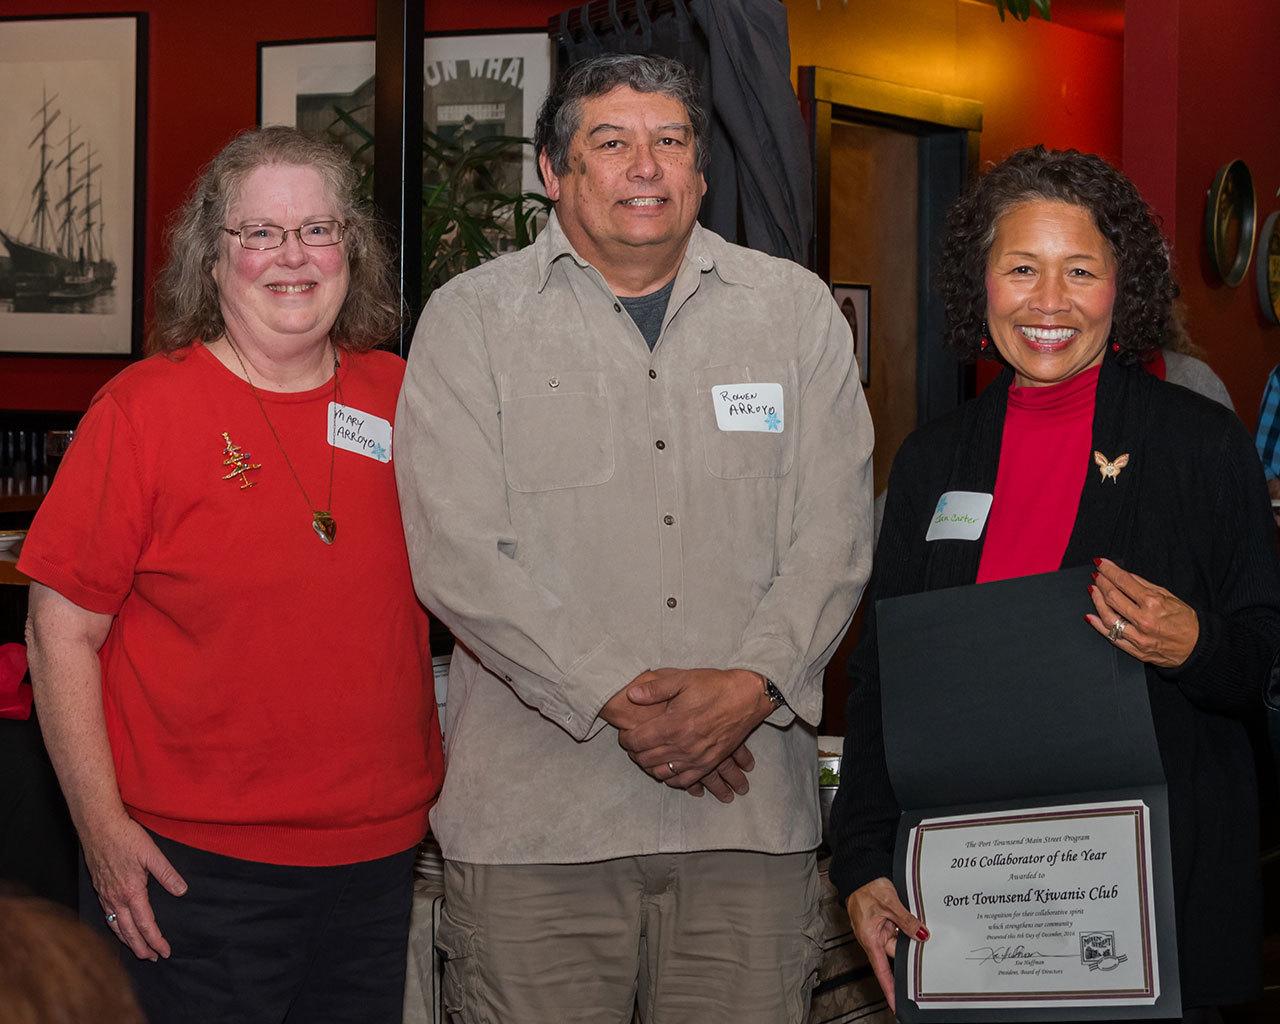 From left, Mary and Rowen Arroyo accept the Collaborator of the Year award on behalf of the Kiwanis Port Townsend. (Deja View Photography)